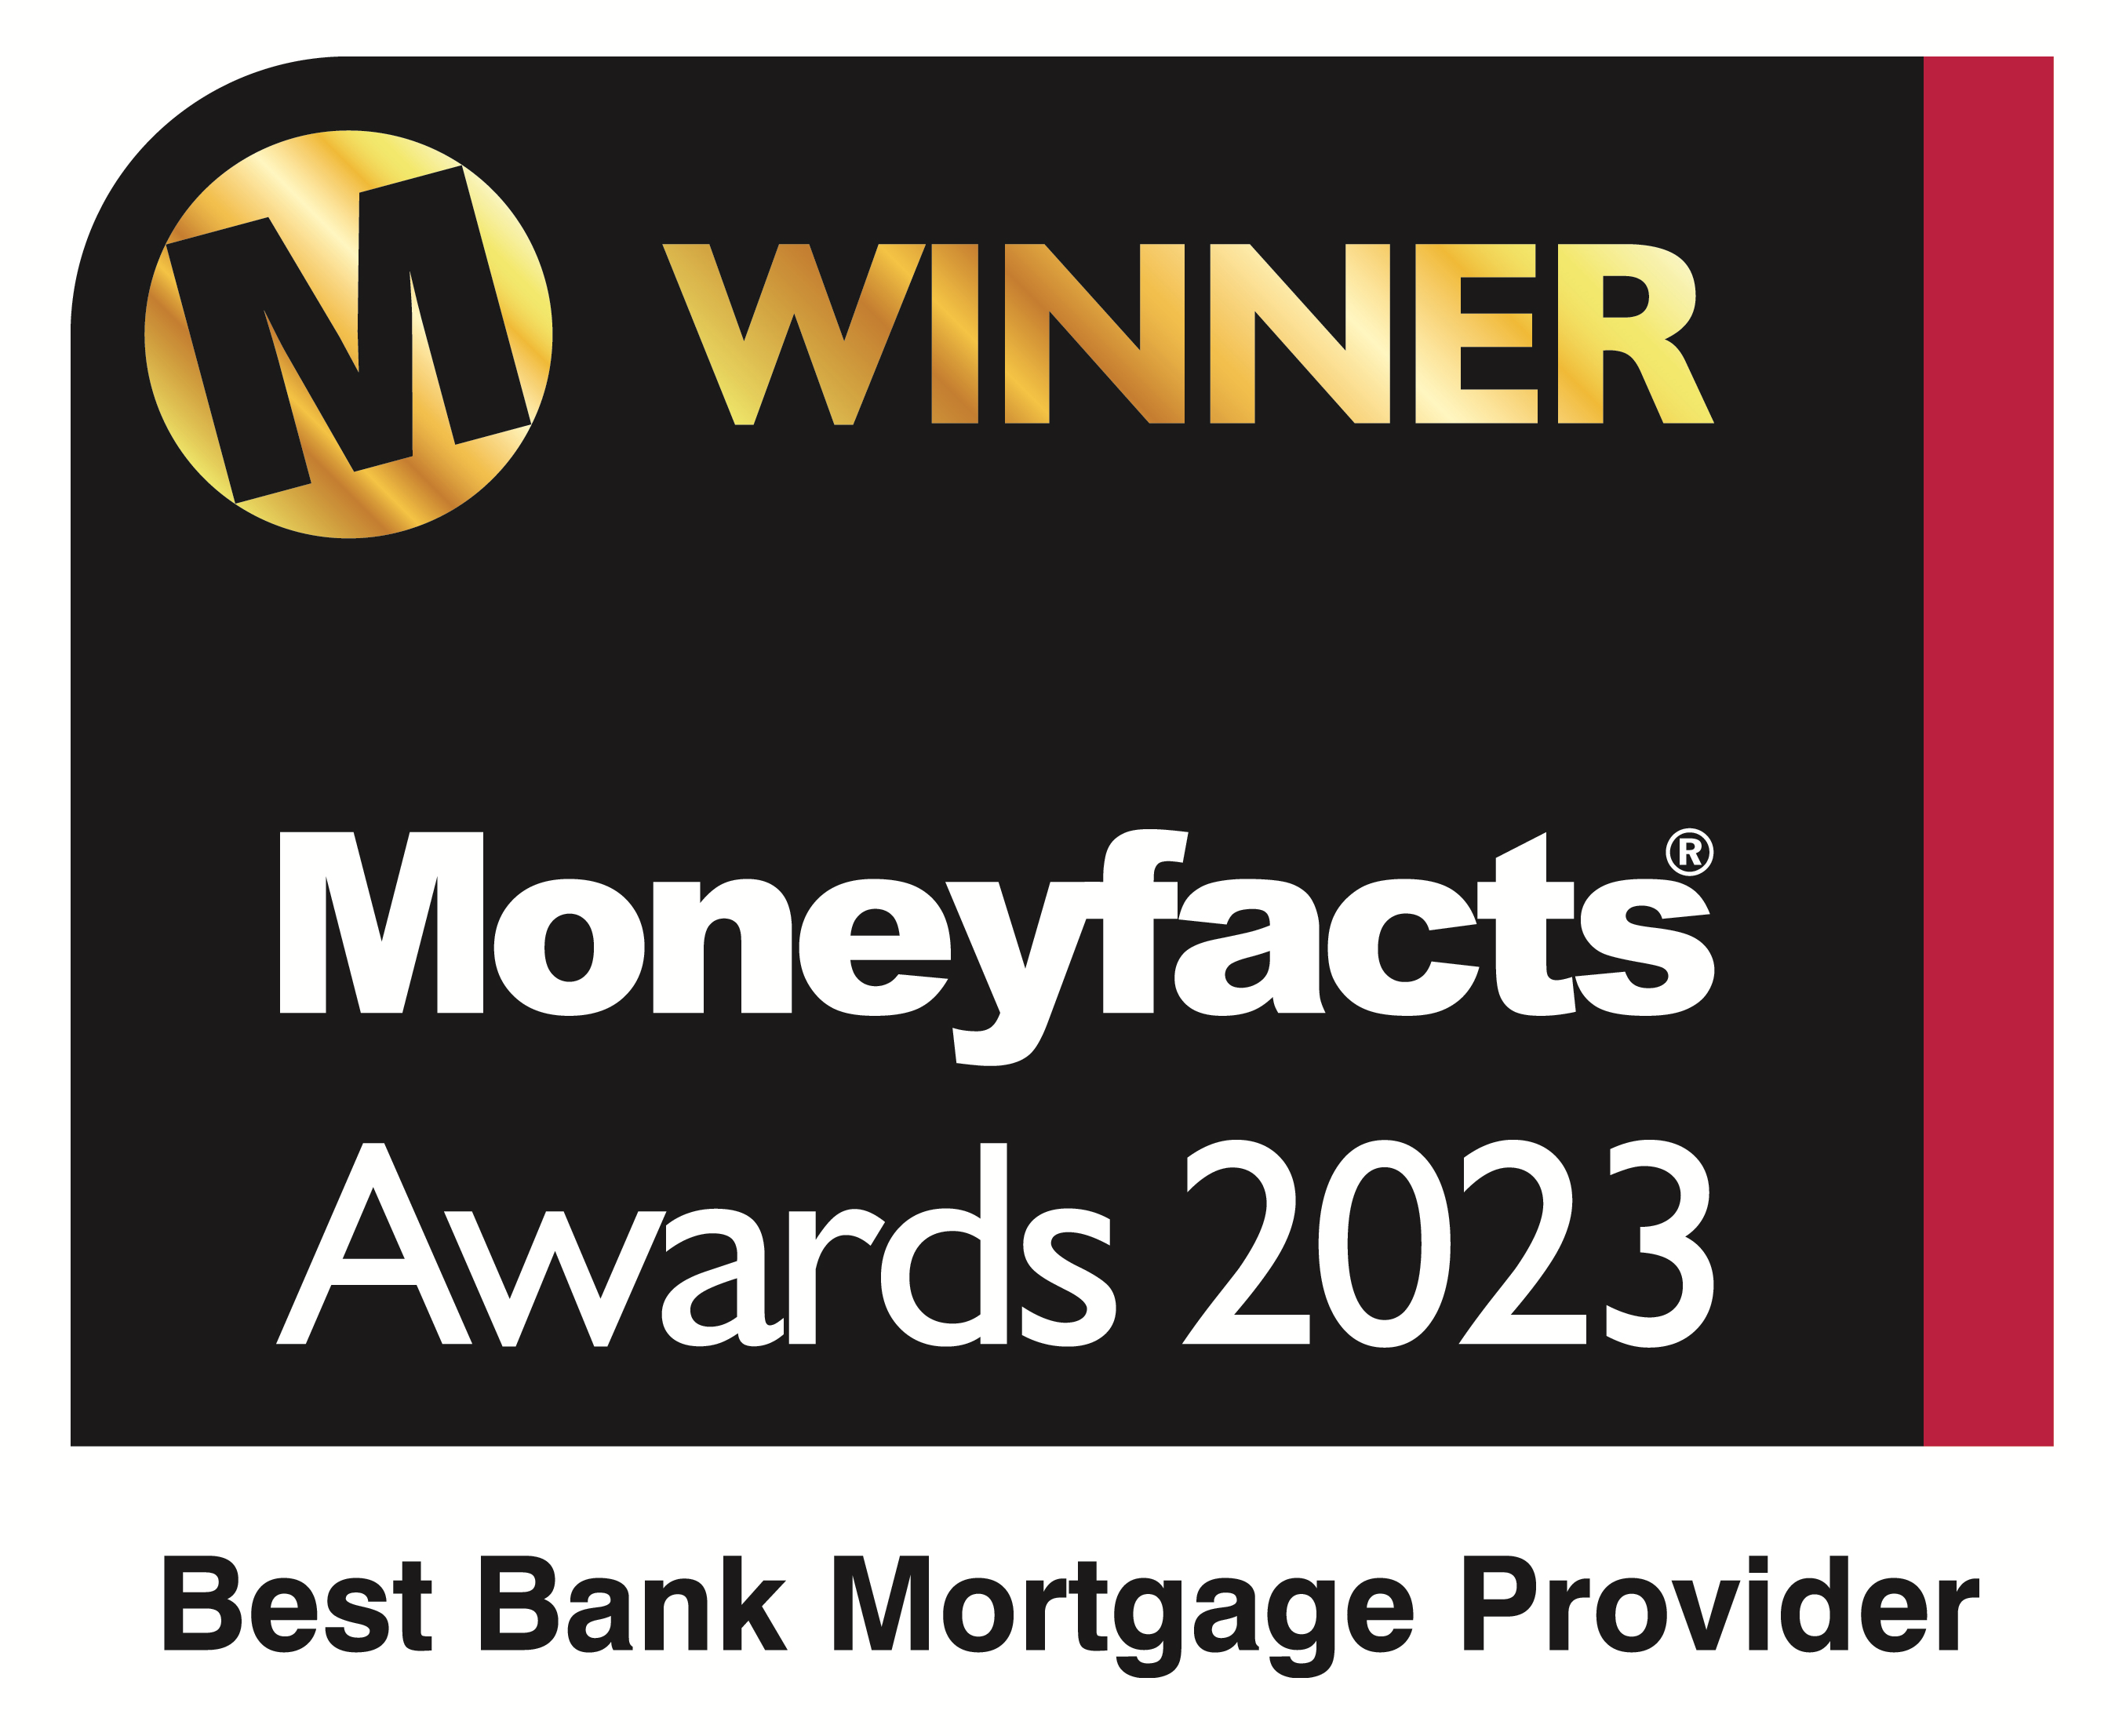 Winner of Moneyfacts Awards 2023 for Best Bank Mortgage Provider.